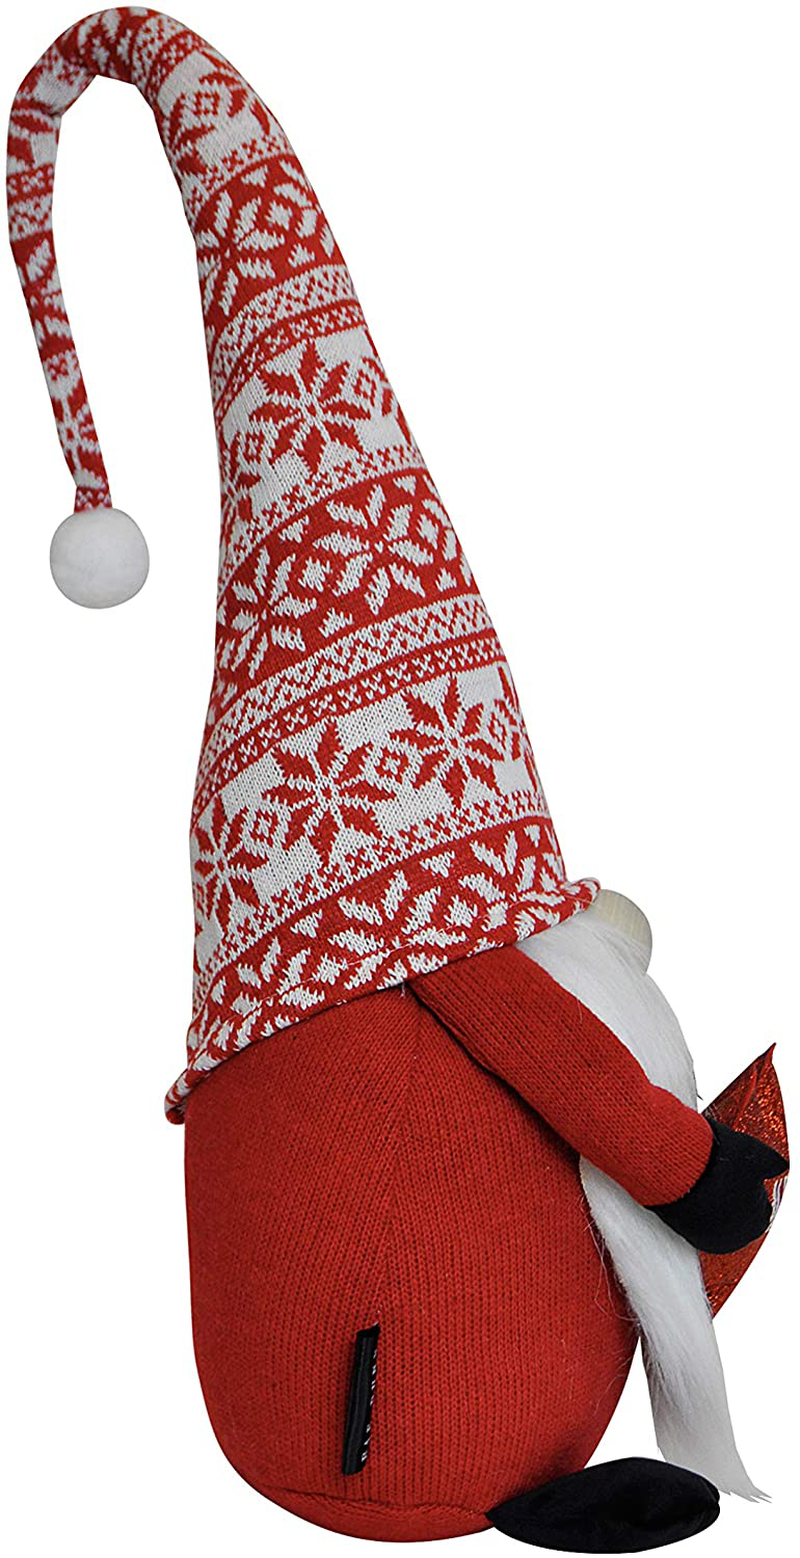 Rae Dunn Christmas Gnome Merry - 19 Inch Stuffed Plush Santa Figurine Doll with Felt Hat - Cute Ornaments and Holiday Decorations for Home Decor and Office Home & Garden > Decor > Seasonal & Holiday Decorations& Garden > Decor > Seasonal & Holiday Decorations Rae Dunn   